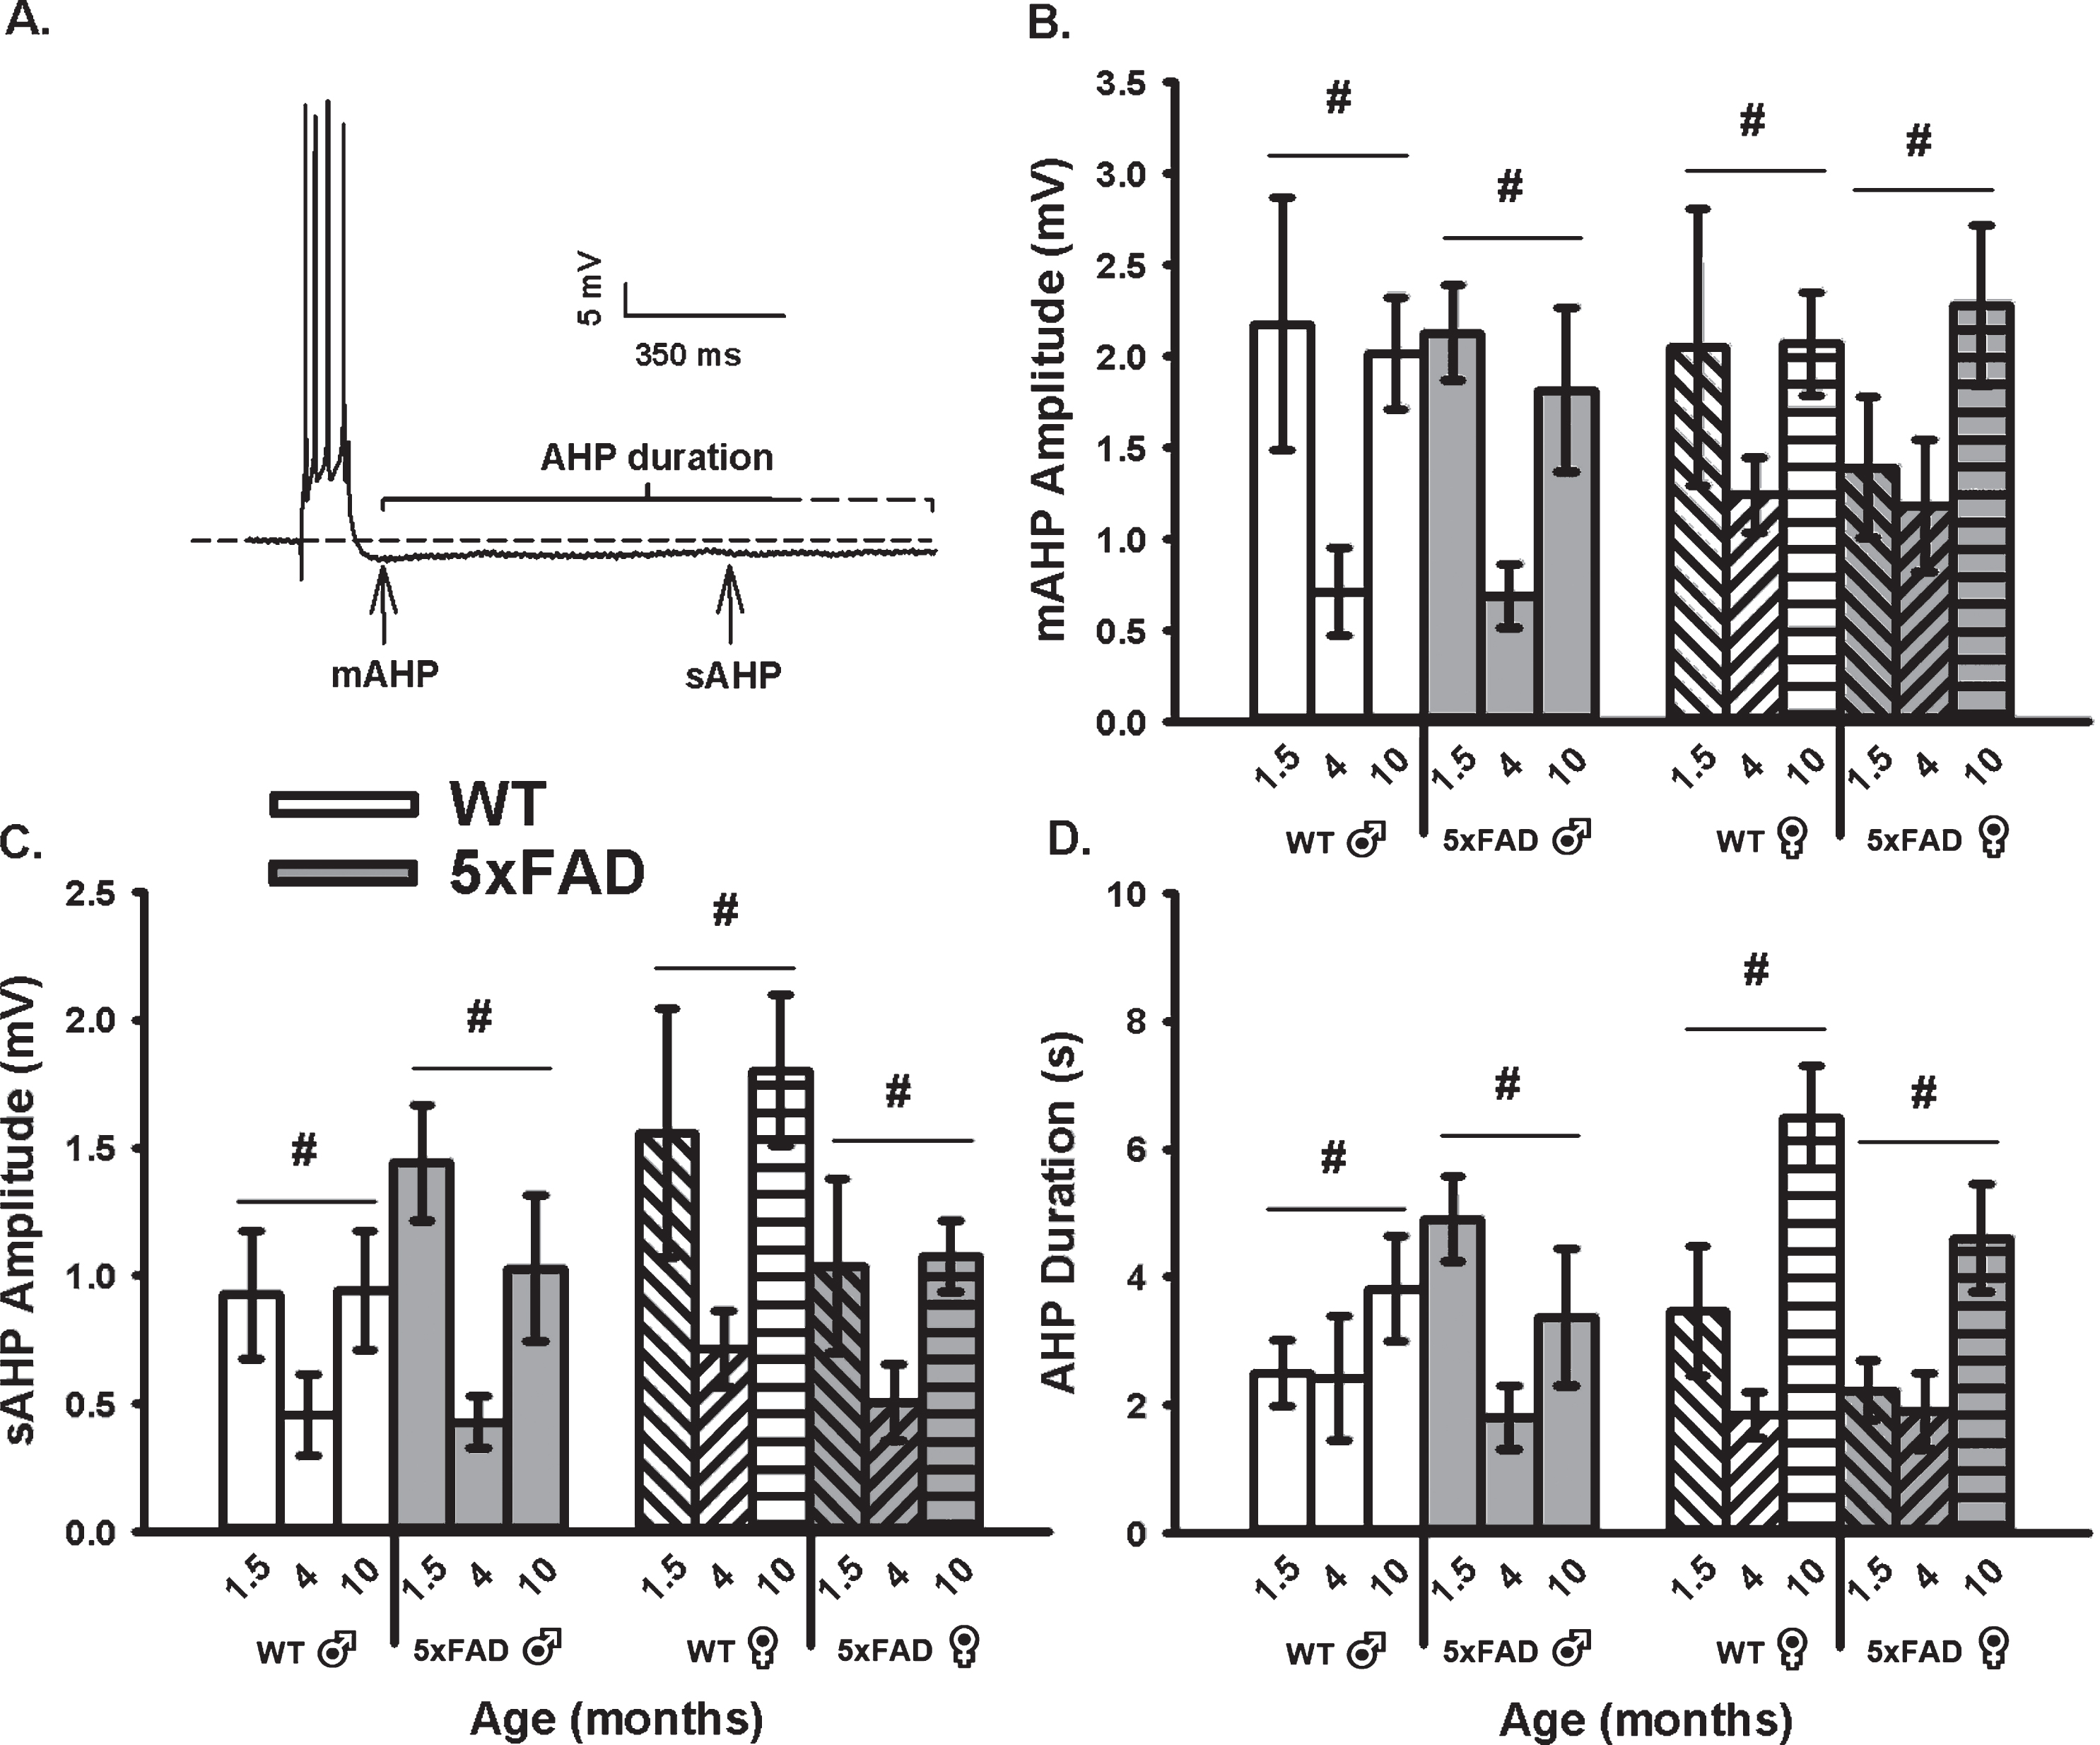 AHP Measures in WT and 5×FAD Mice Across Age and Sex. A) Example of an AHP following post-synaptic depolarization with 4 APs. B) A main effect of aging (p < 0.05) on the mAHP was observed within each genotype and across sex. C, D) Similar findings were observed on the sAHP (800 ms) amplitude measures, as well as on the AHP duration. Hashes (#) represent significance in aging at p < 0.05.